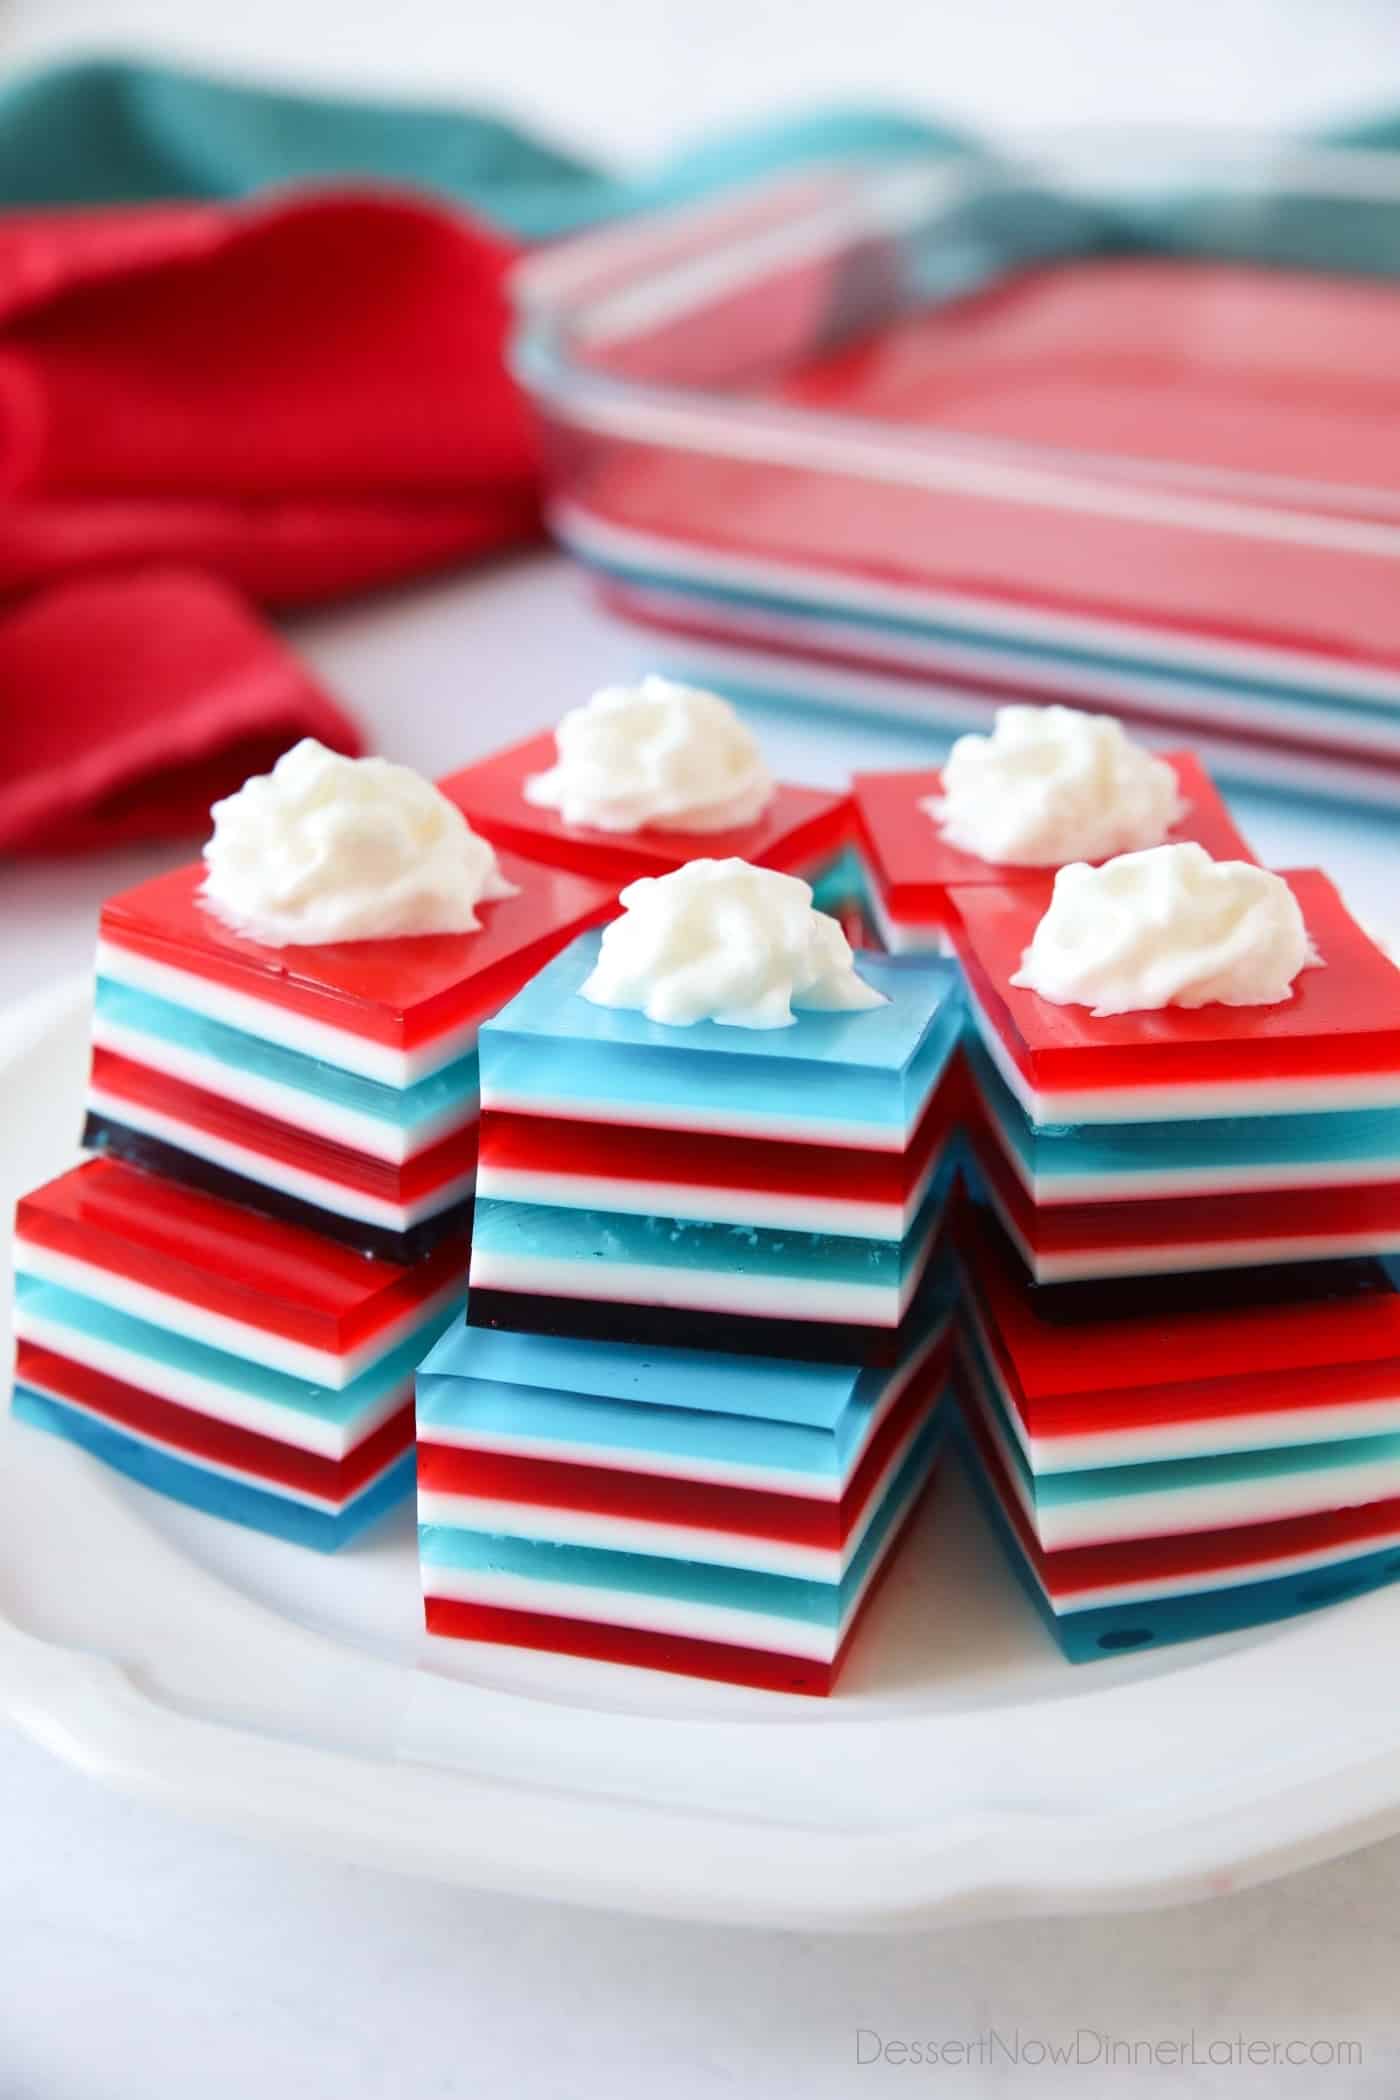 Red White and Blue Jello (4th of July Dessert) | Dessert Now Dinner Later